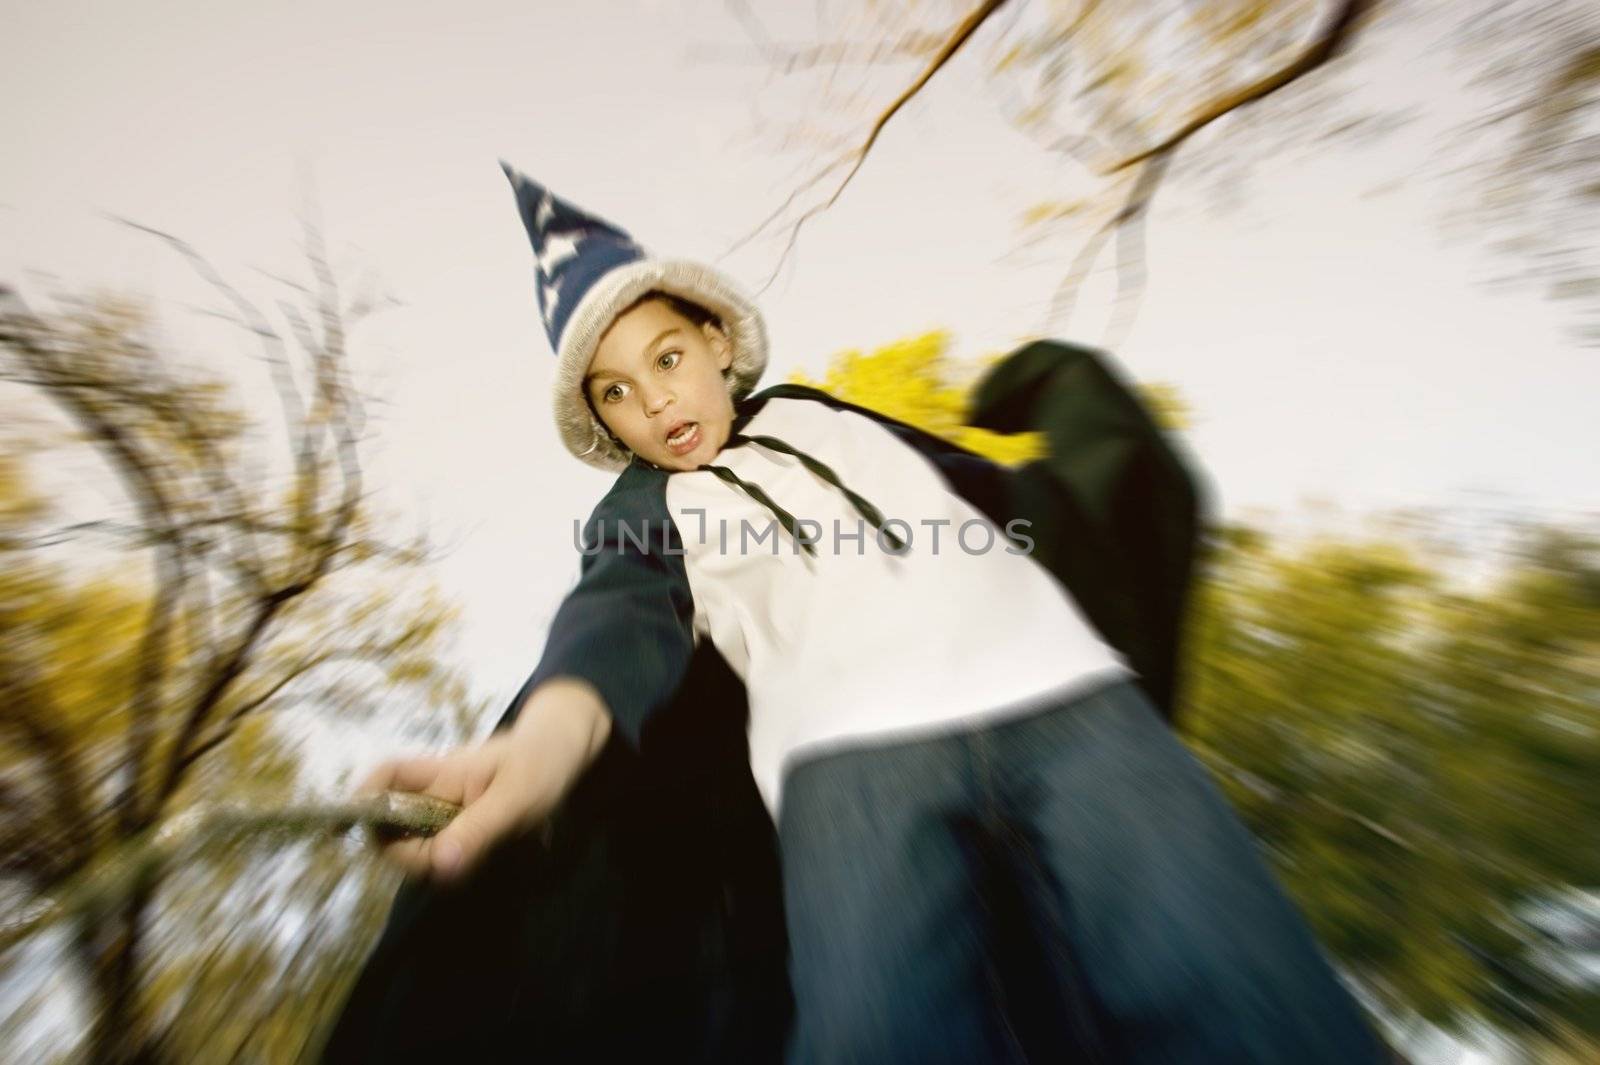 Young boy in a wizard costume casts a spell with a stick wand.